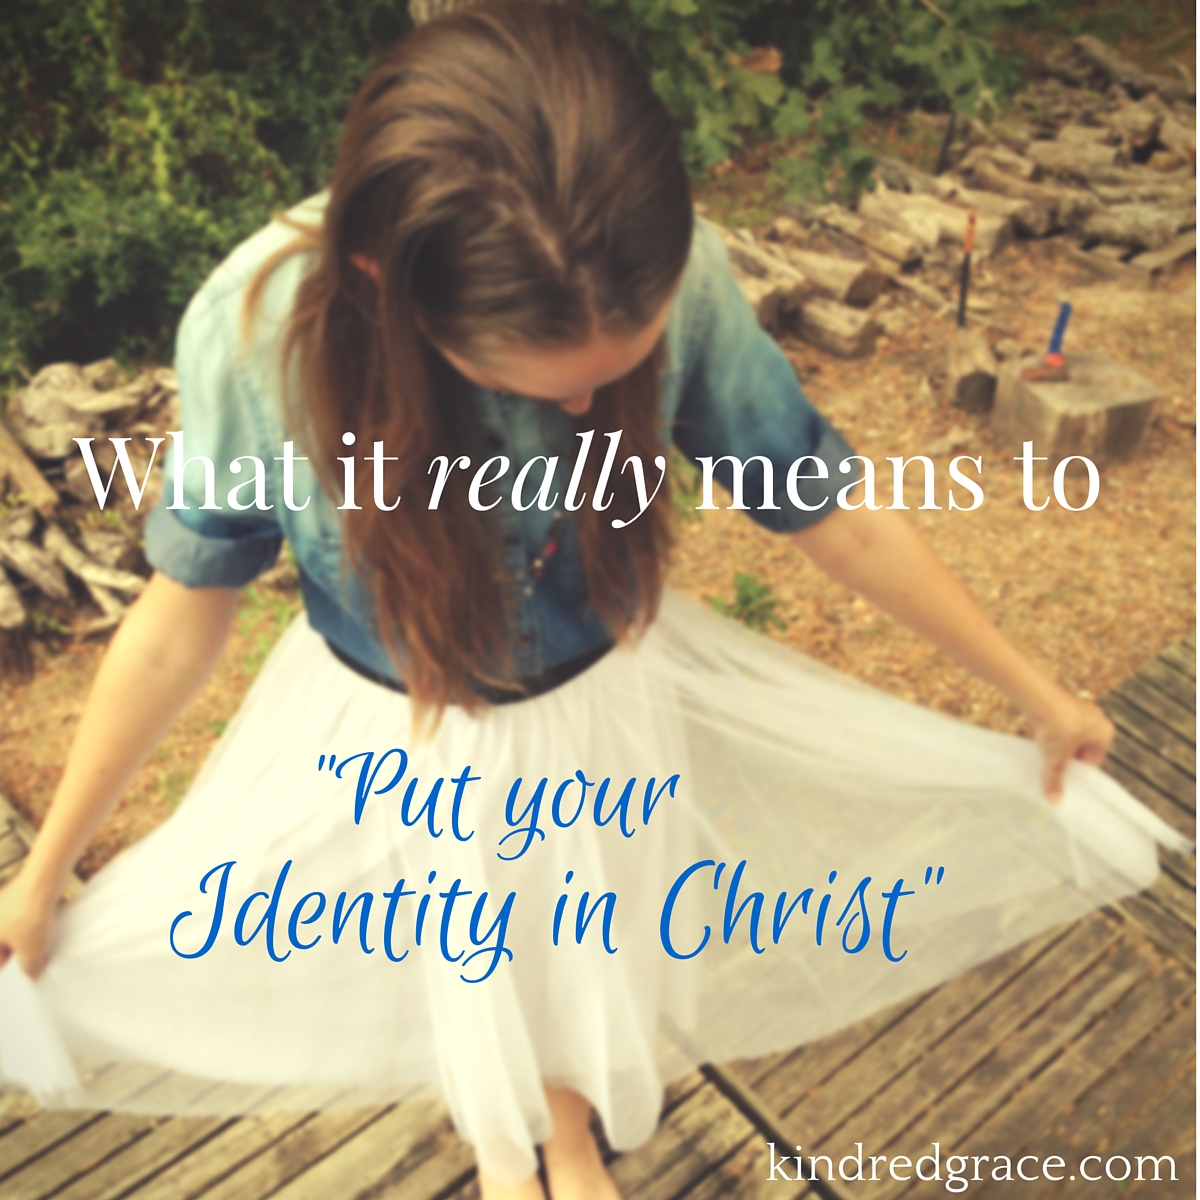 What it (really) means to put your identity in Christ (kindredgrace.com)